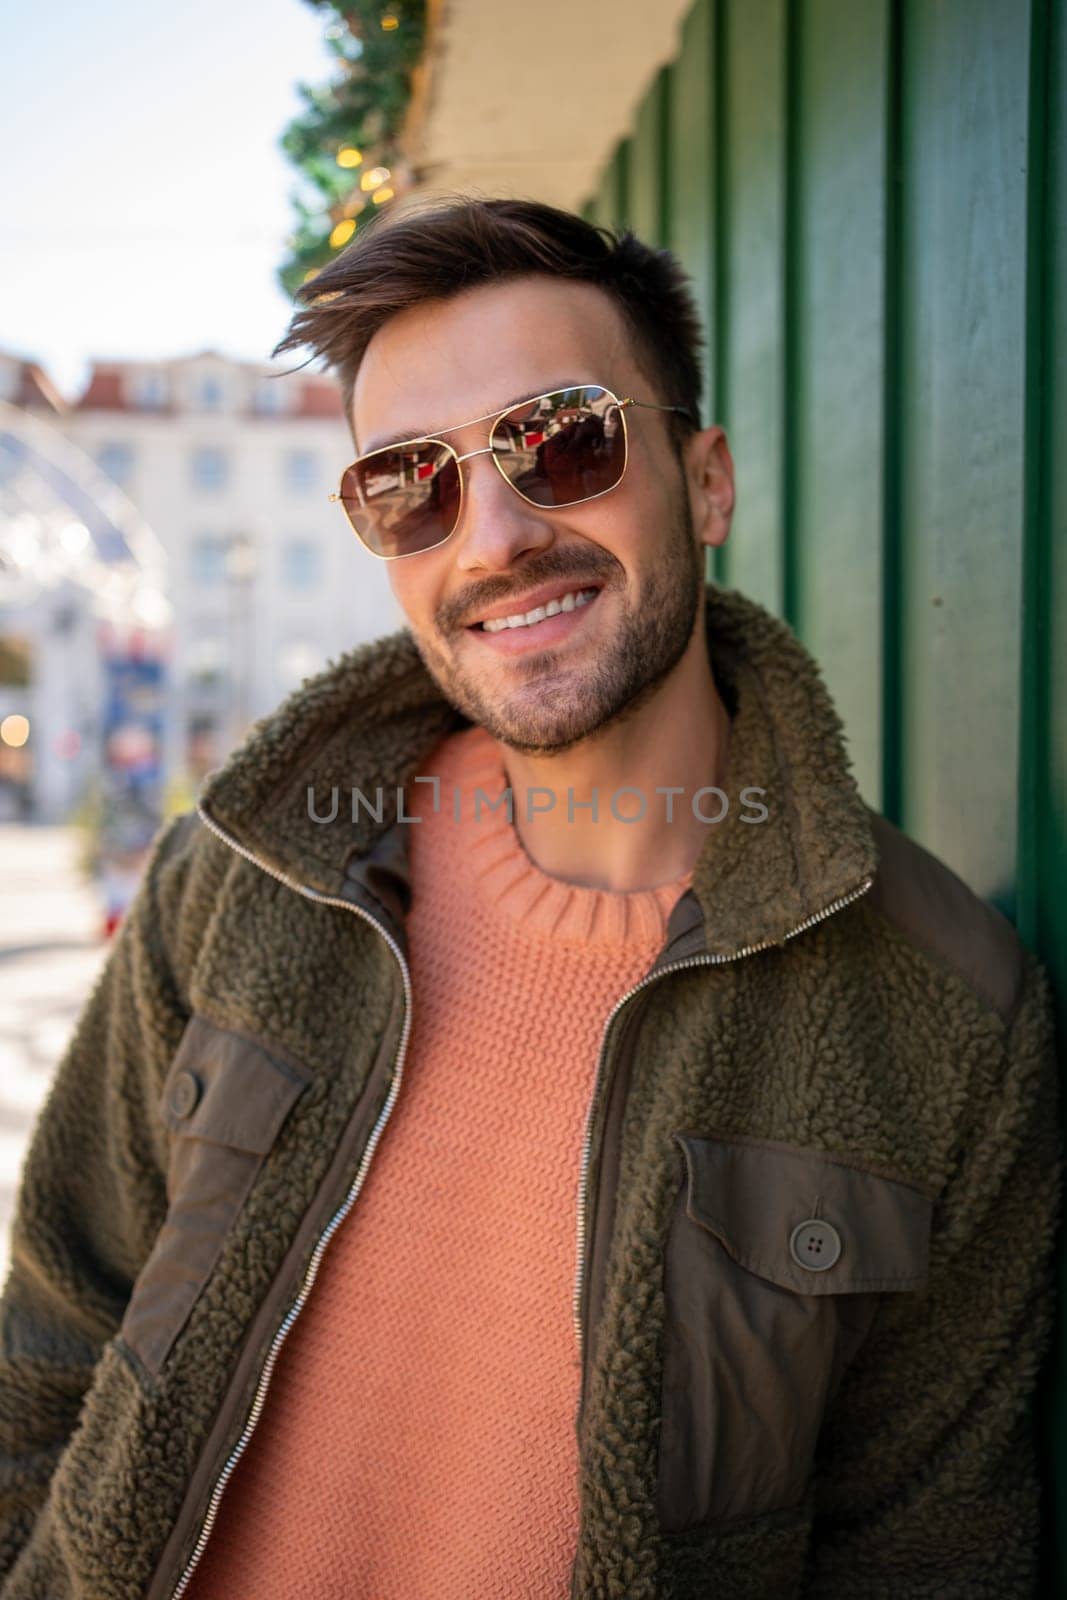 Handsome man wearing sunglasses standing outside looking camera and smiling. Close up portrait young bearded male person, vertical photo